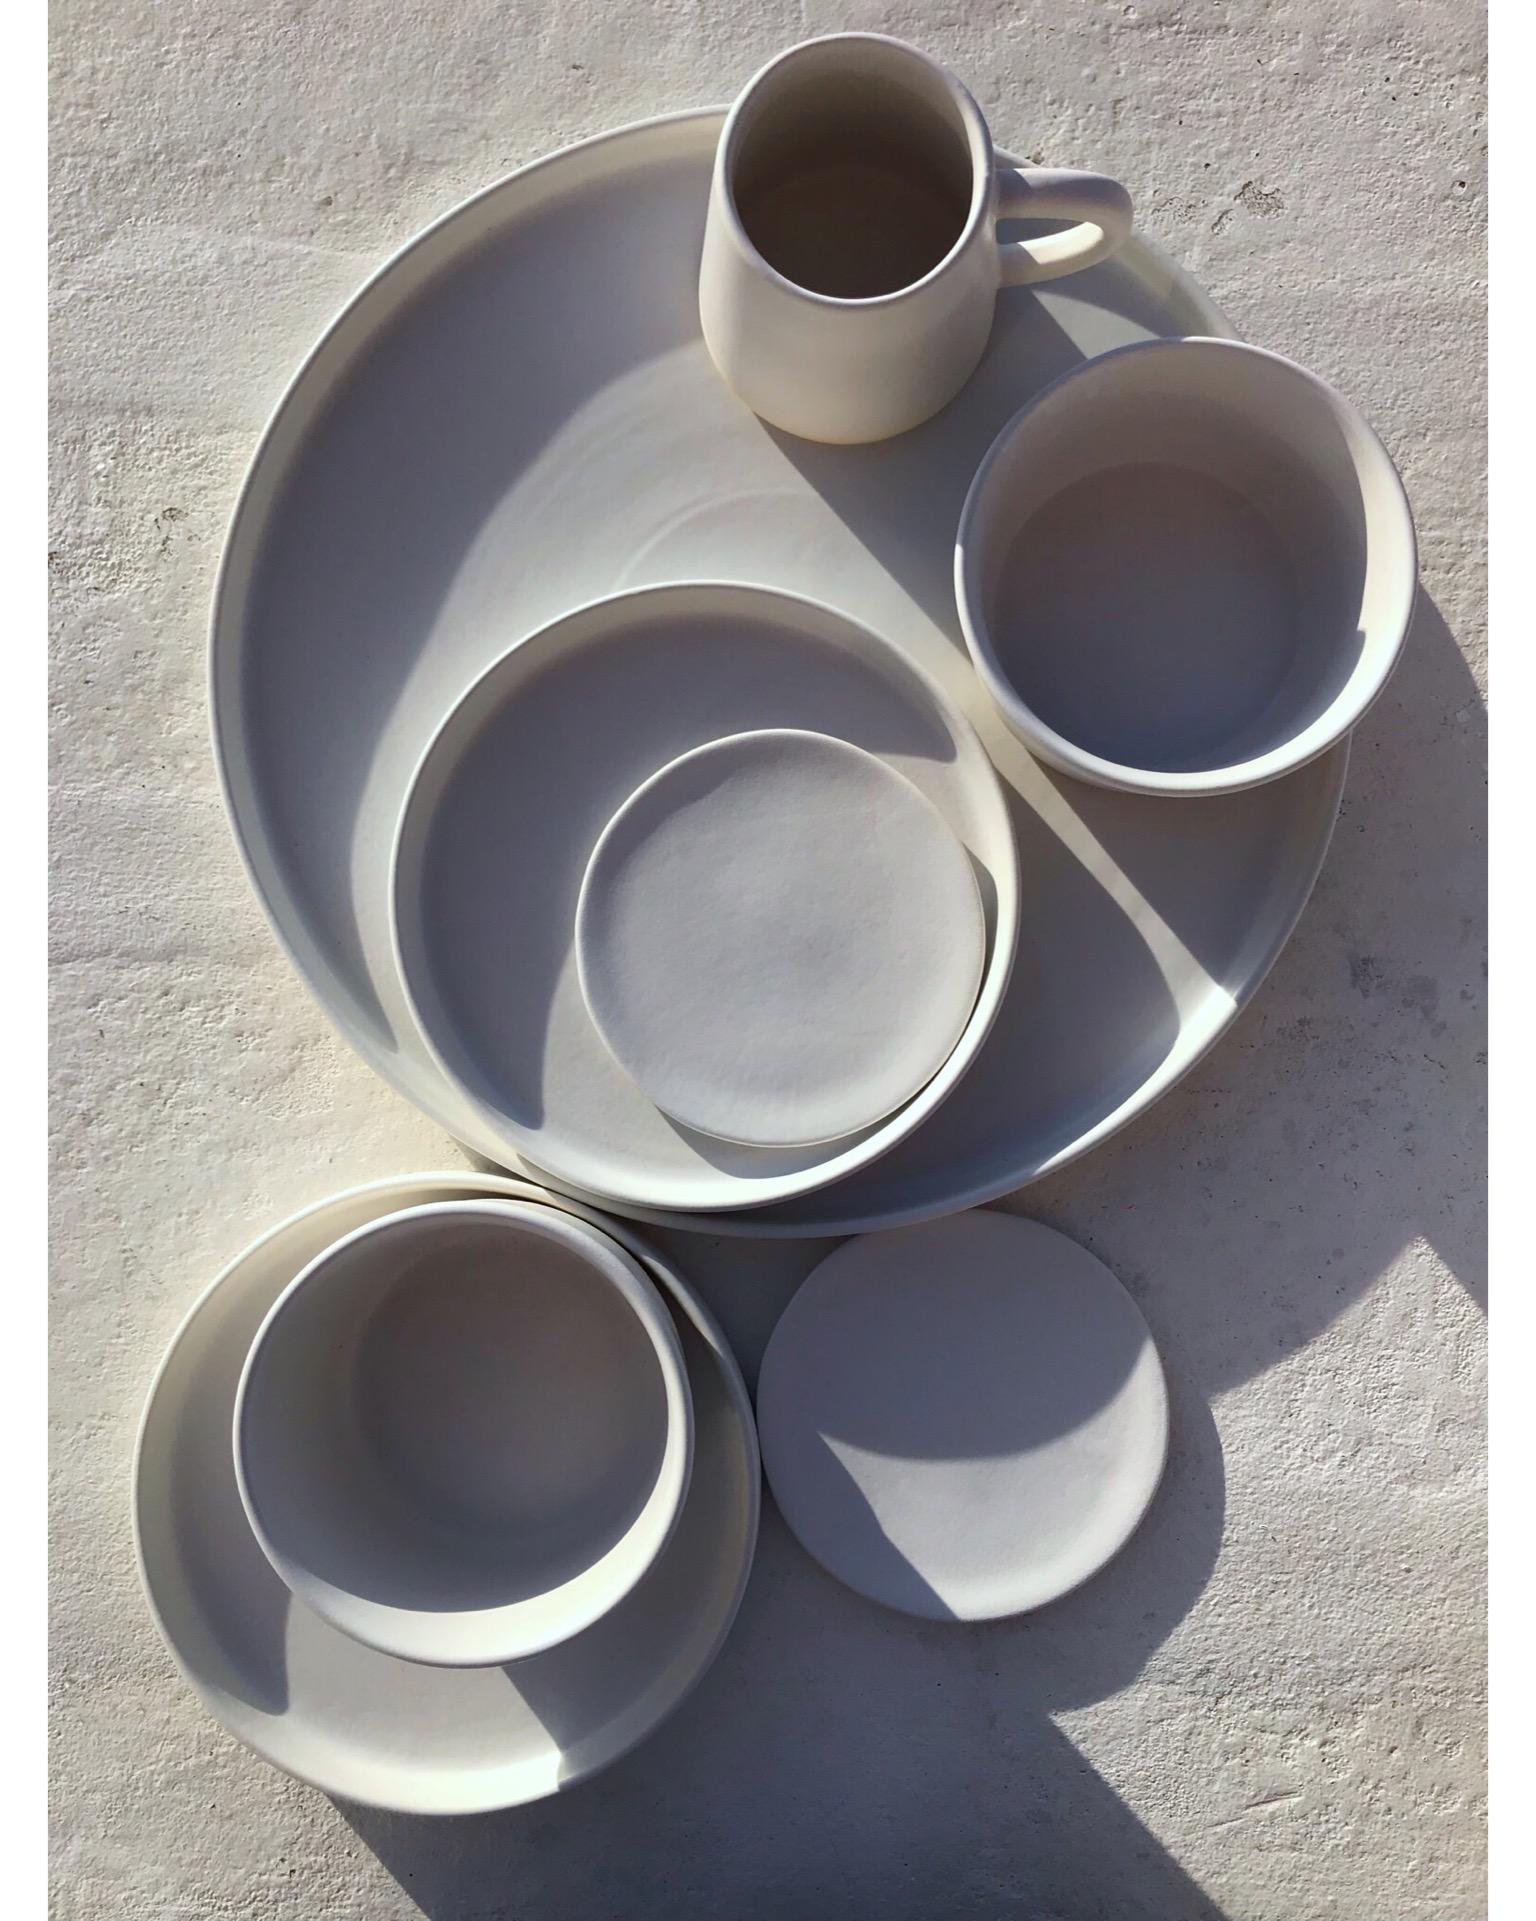 Handmade and hand painted ceramics from one of the mother countries, Portugal, these beautiful pieces for your table will add a modern touch and are perfect to mix and match. This bowl comes in black or white, and in two different sizes:

Small